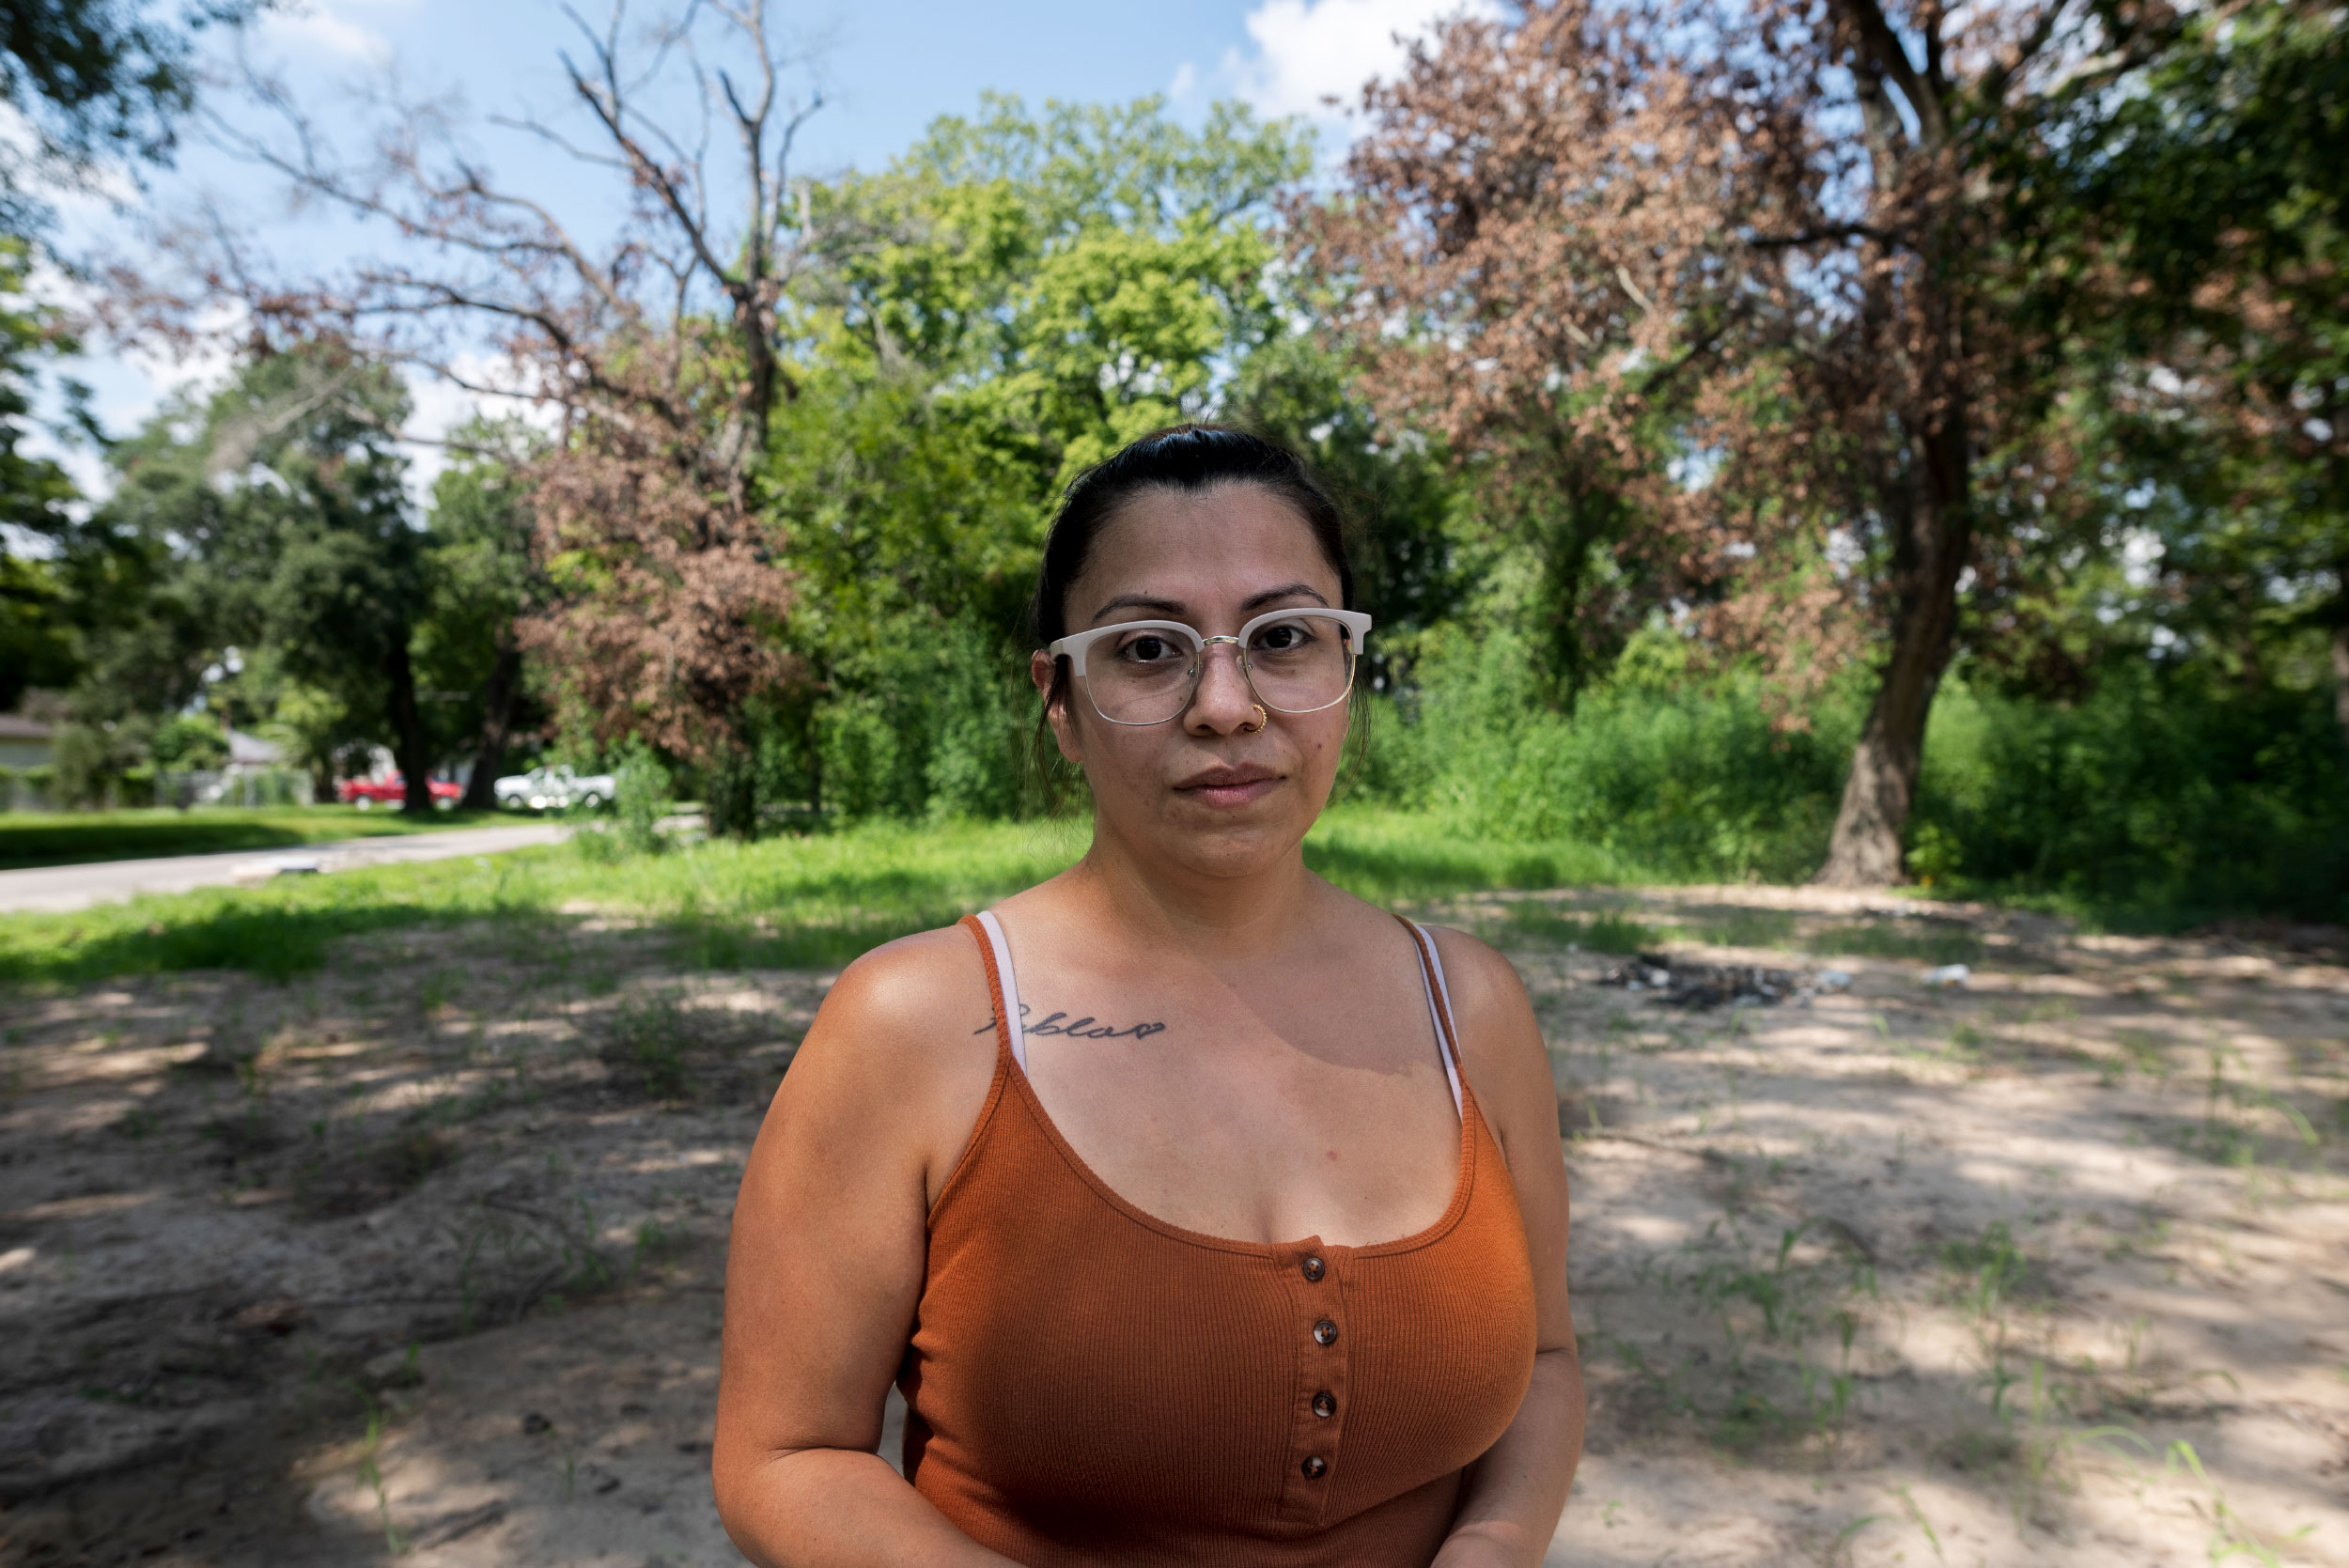 A woman with glasses and an orange tank top centered. In the background, trees and dead grass